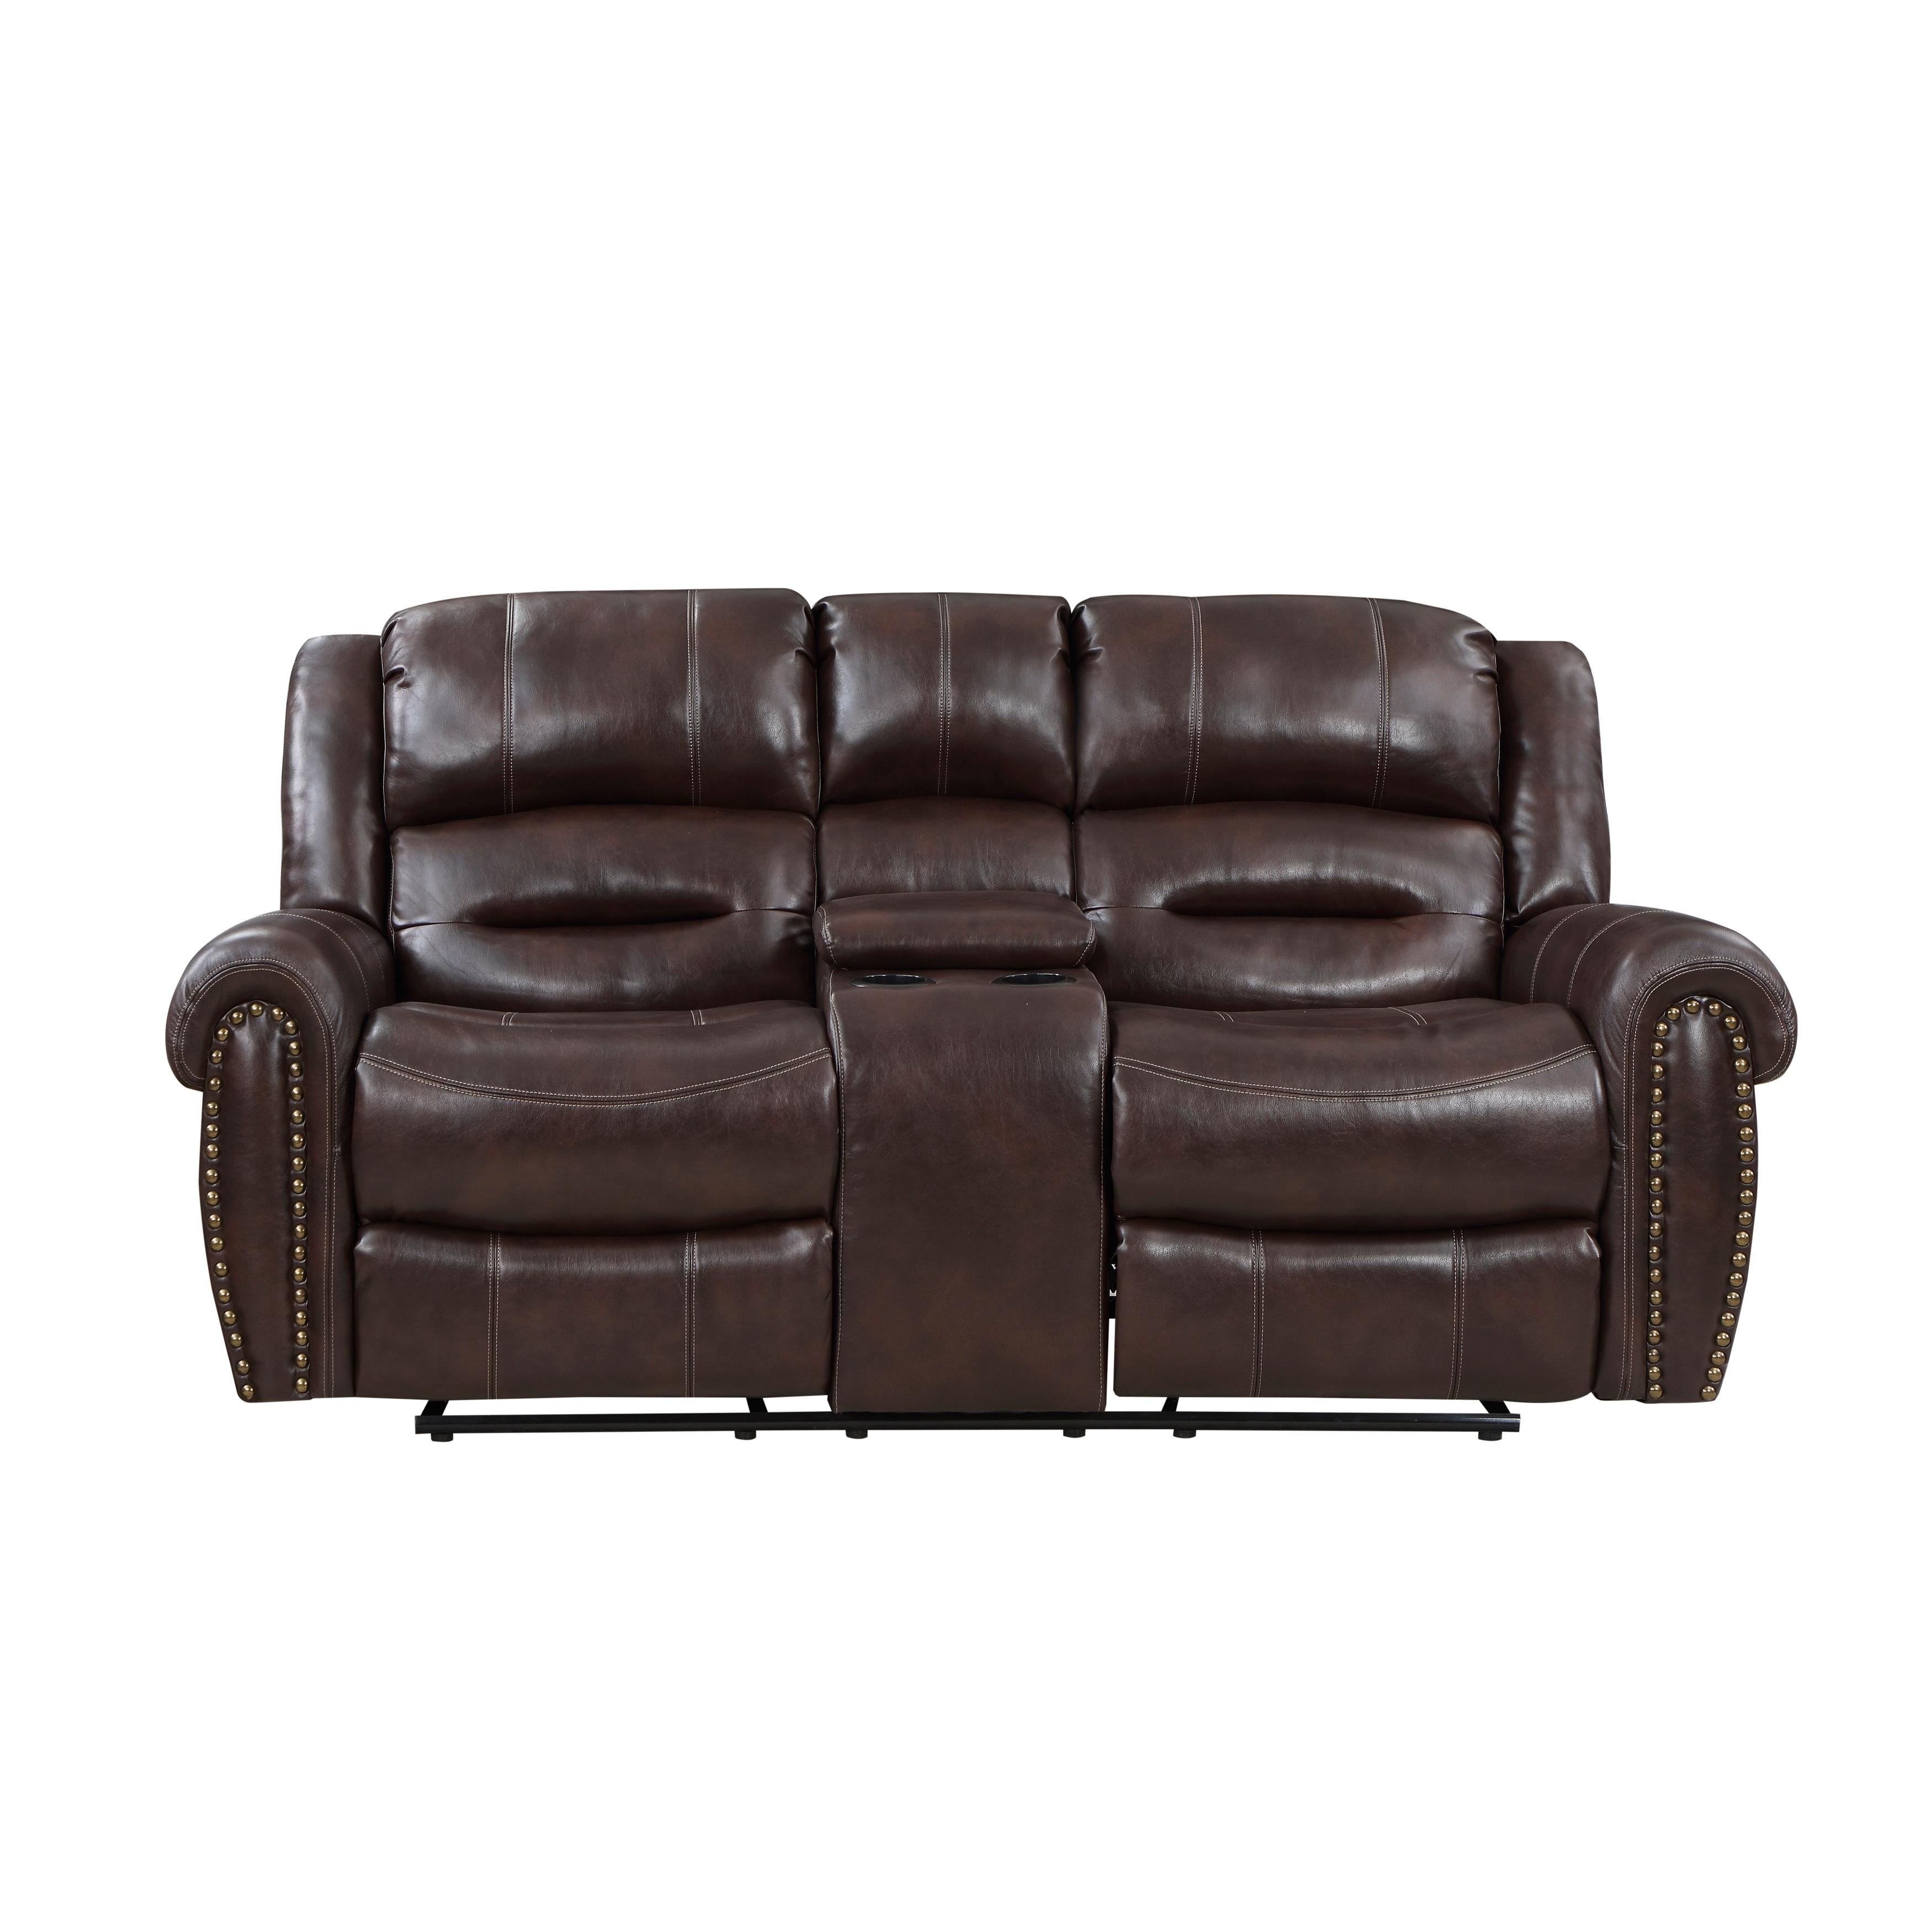 Traditional Reclining Loveseat 9668NBR-2 Center Hill 9668NBR-2 in Brown Faux Leather